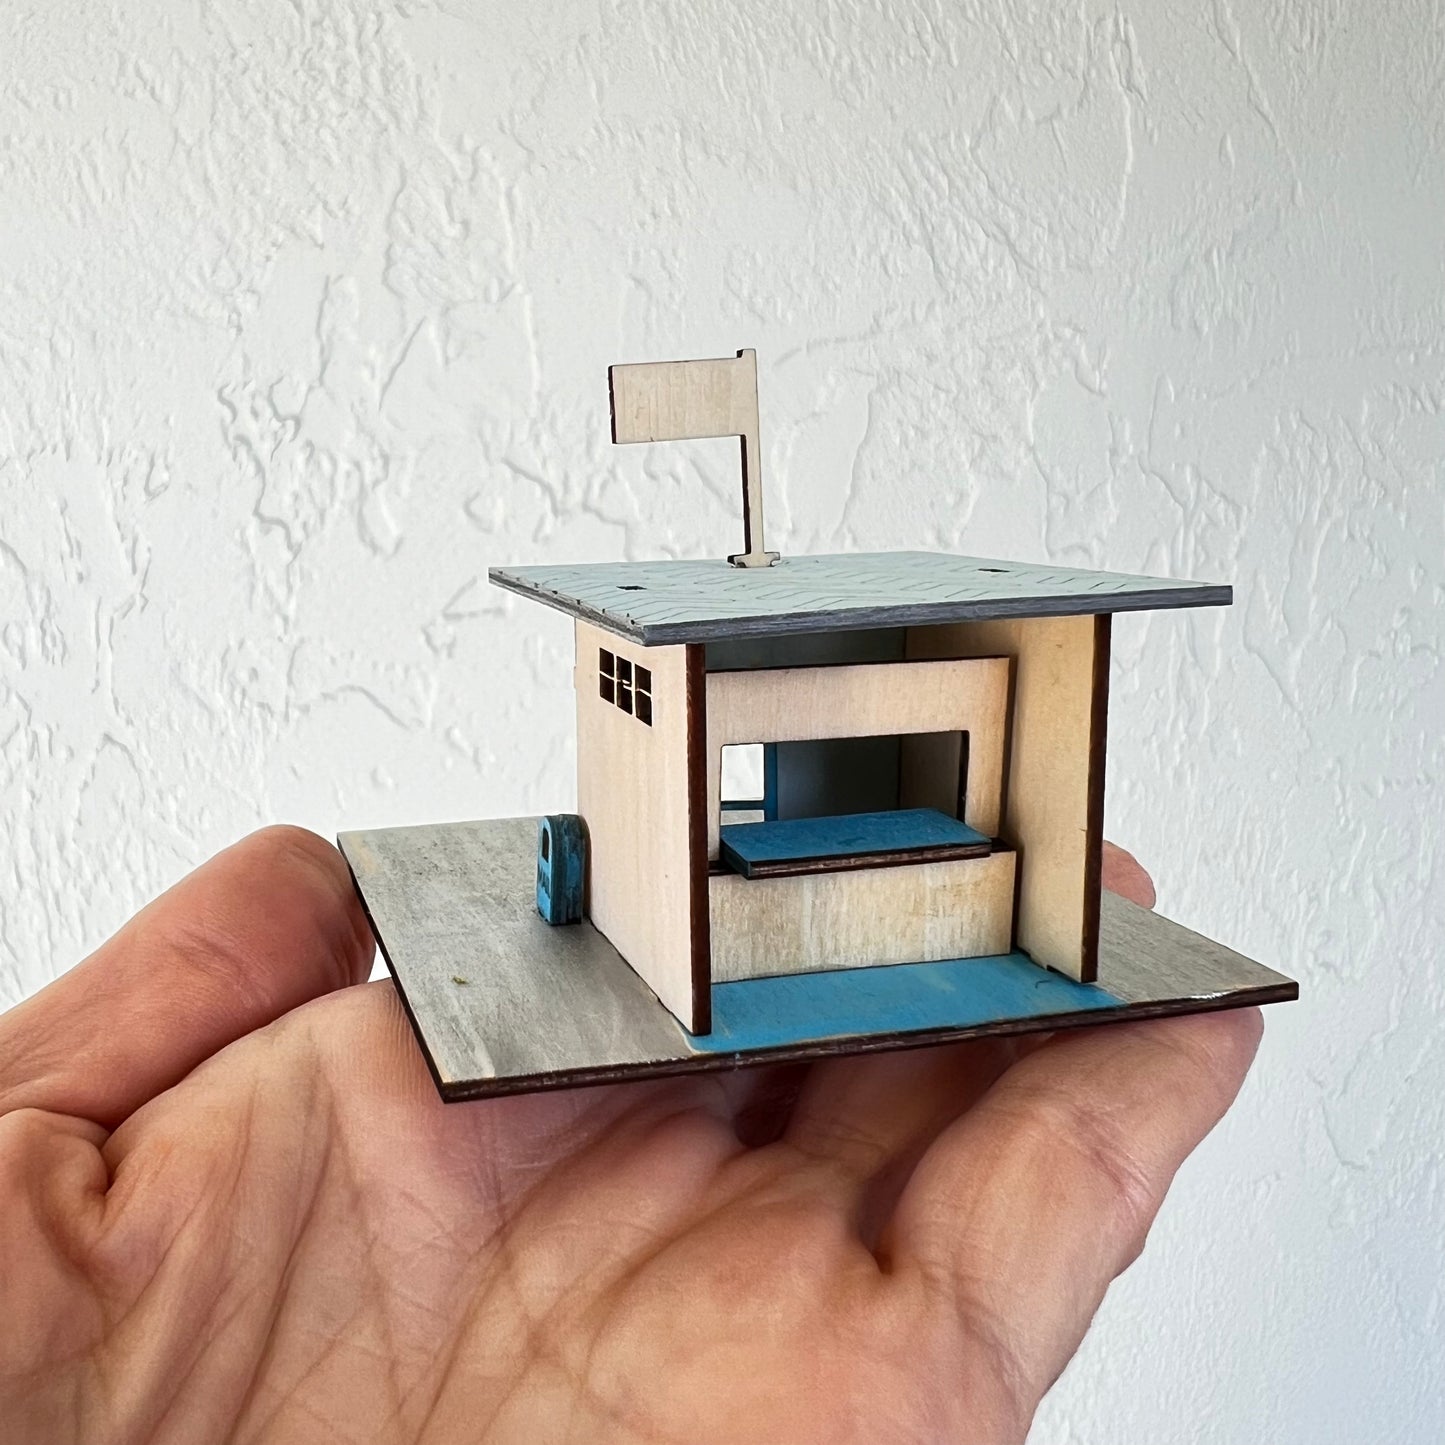 The Post Office, Mini Town Building Kits 1:144